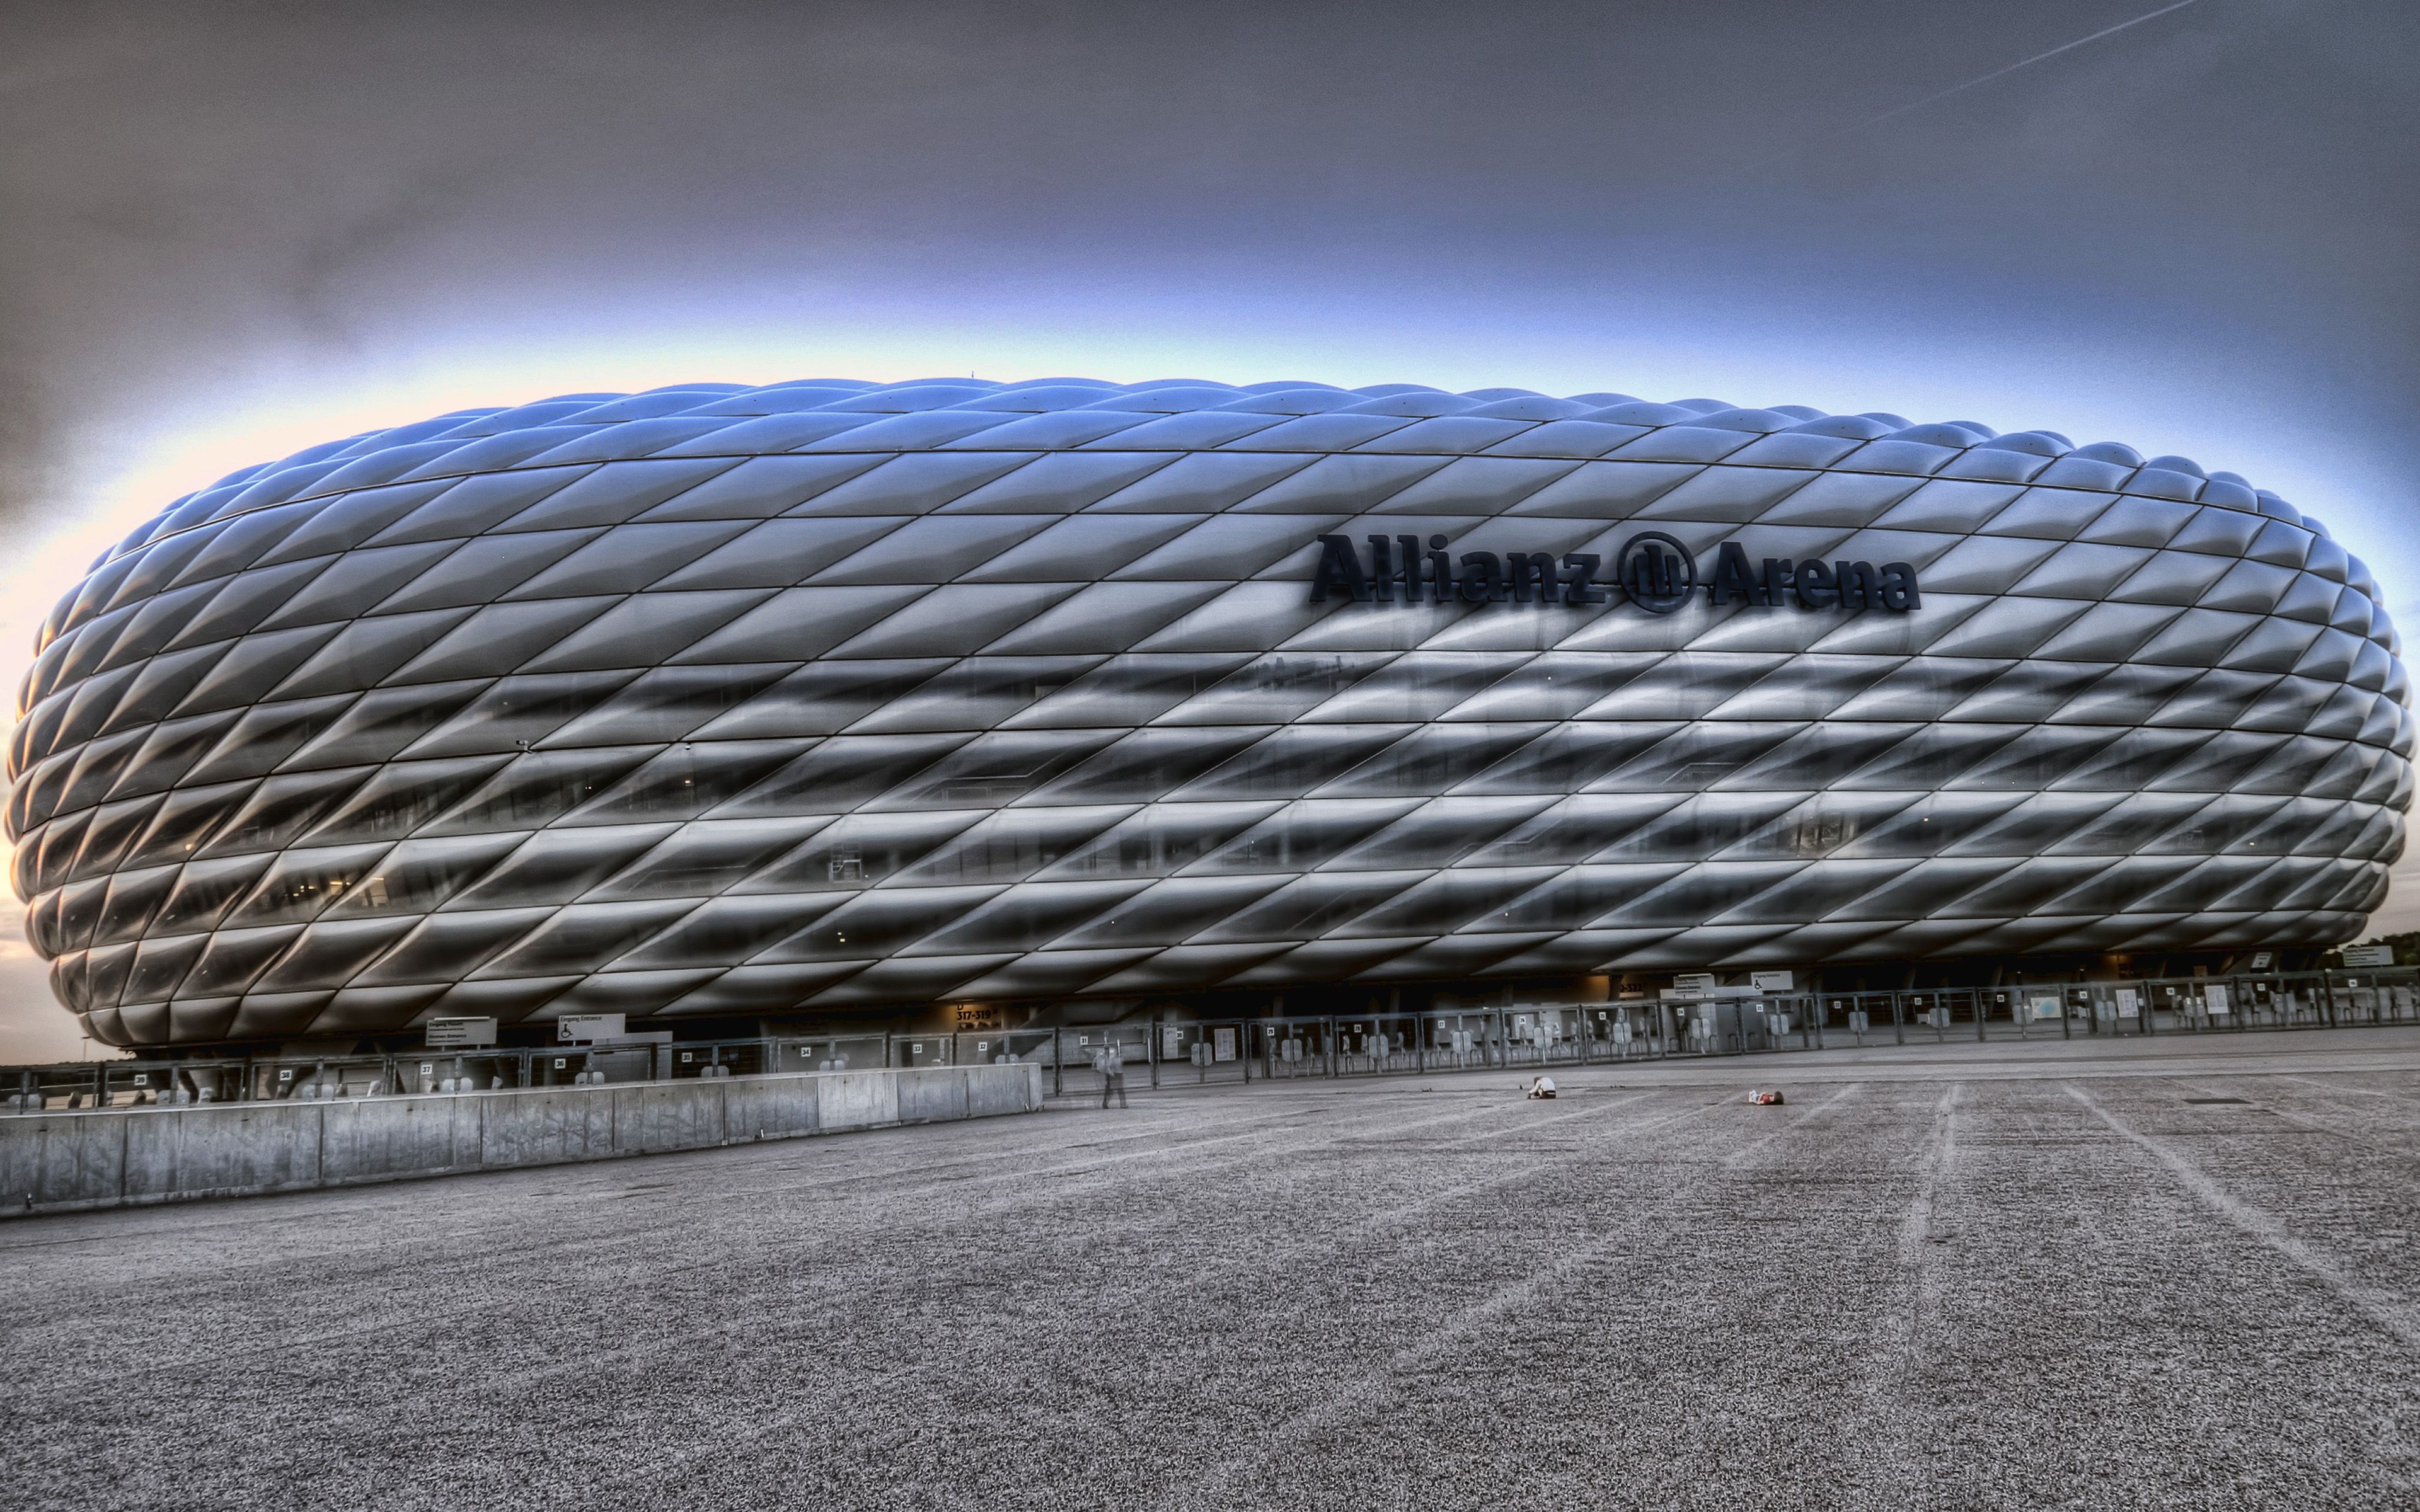 Download wallpaper Bayern Munich Stadium, 4k, panorama, Allianz Arena, HDR, soccer, football stadium, Bayern Munich arena, Germany, german stadiums for desktop with resolution 3840x2400. High Quality HD picture wallpaper